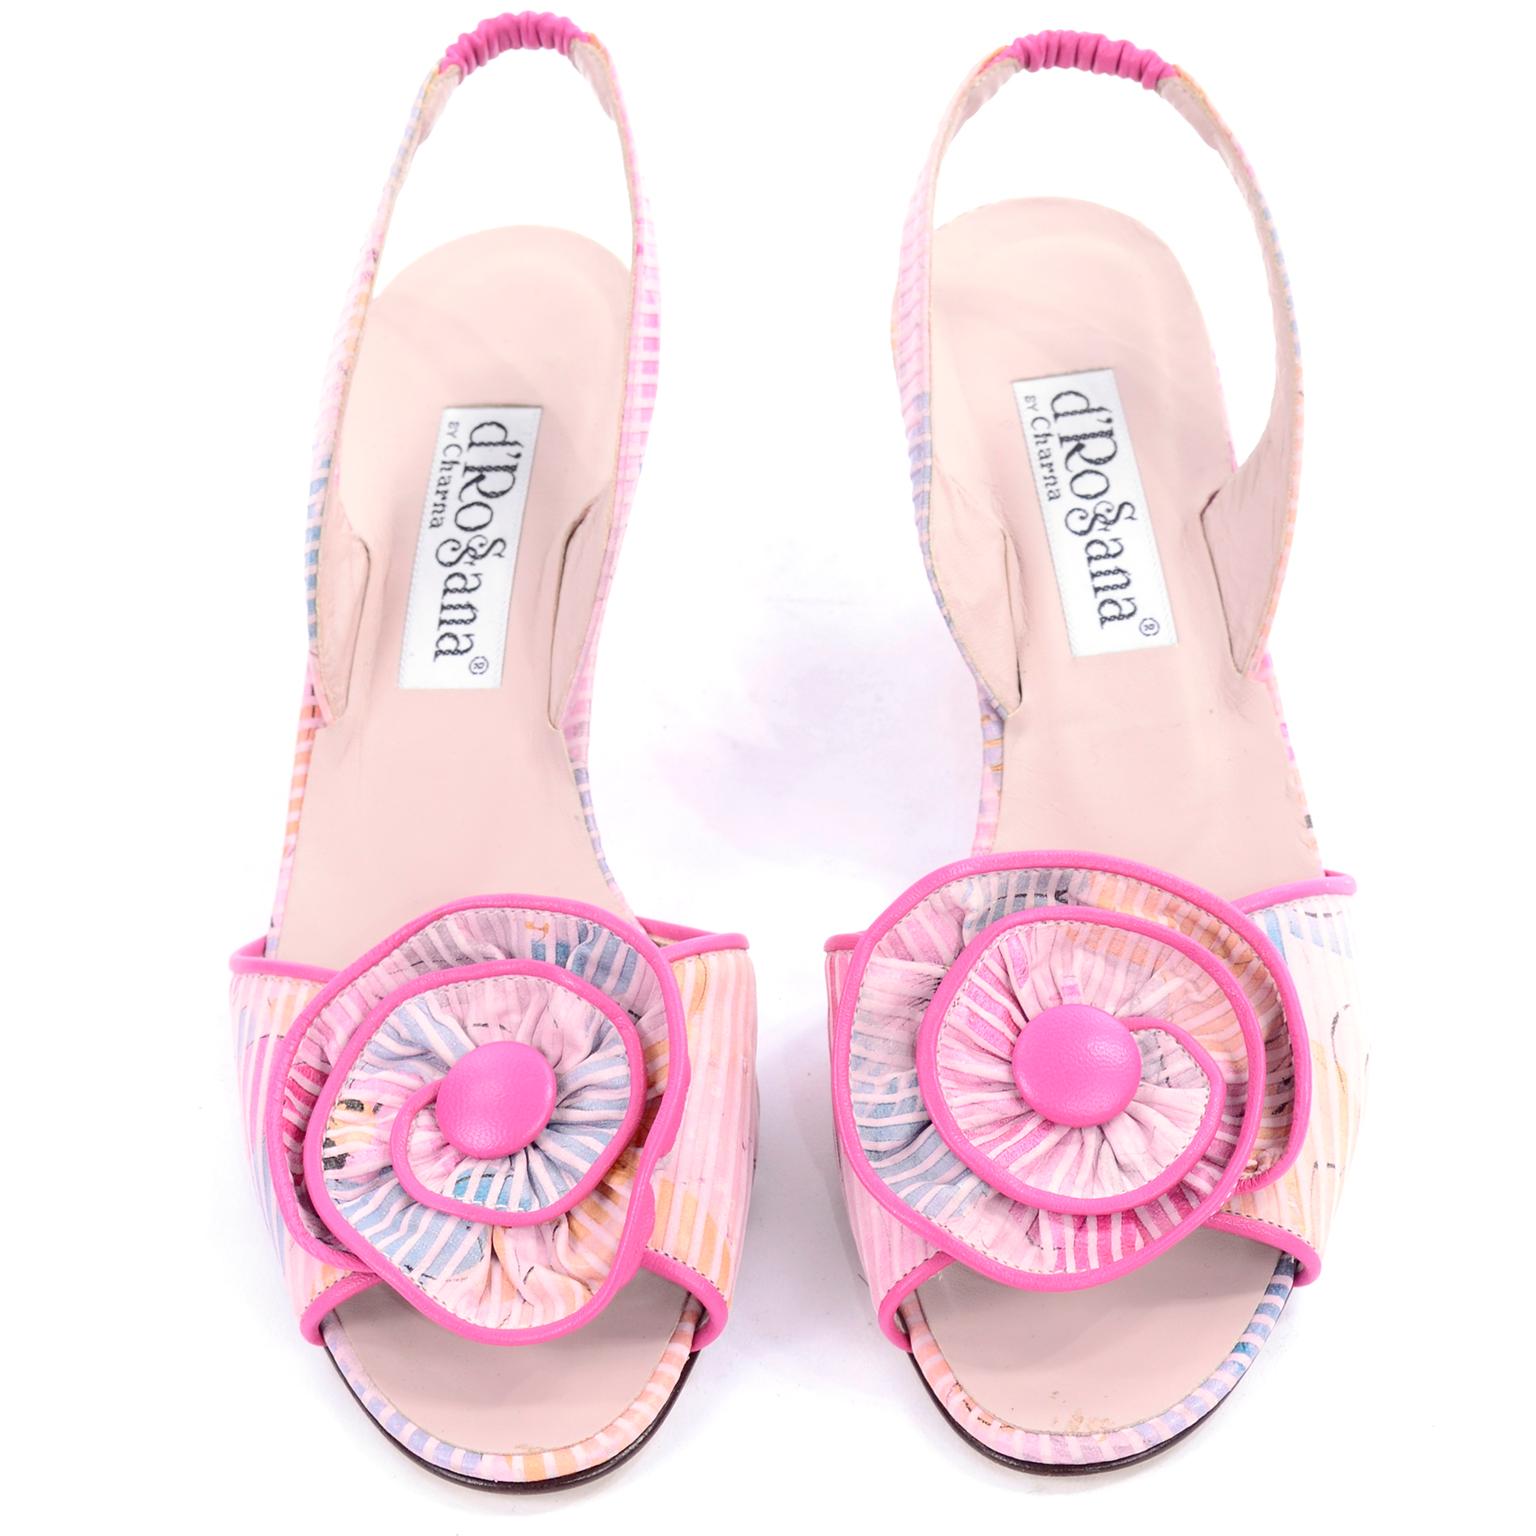 These are wonderful striped floral pink slingbacks by d'Rossana by Charna from the 1980's. The shoes have a large flower rosette trimmed in pink leather. There is a small wedge heel and they were worn only once. These open toe shoes have a leather